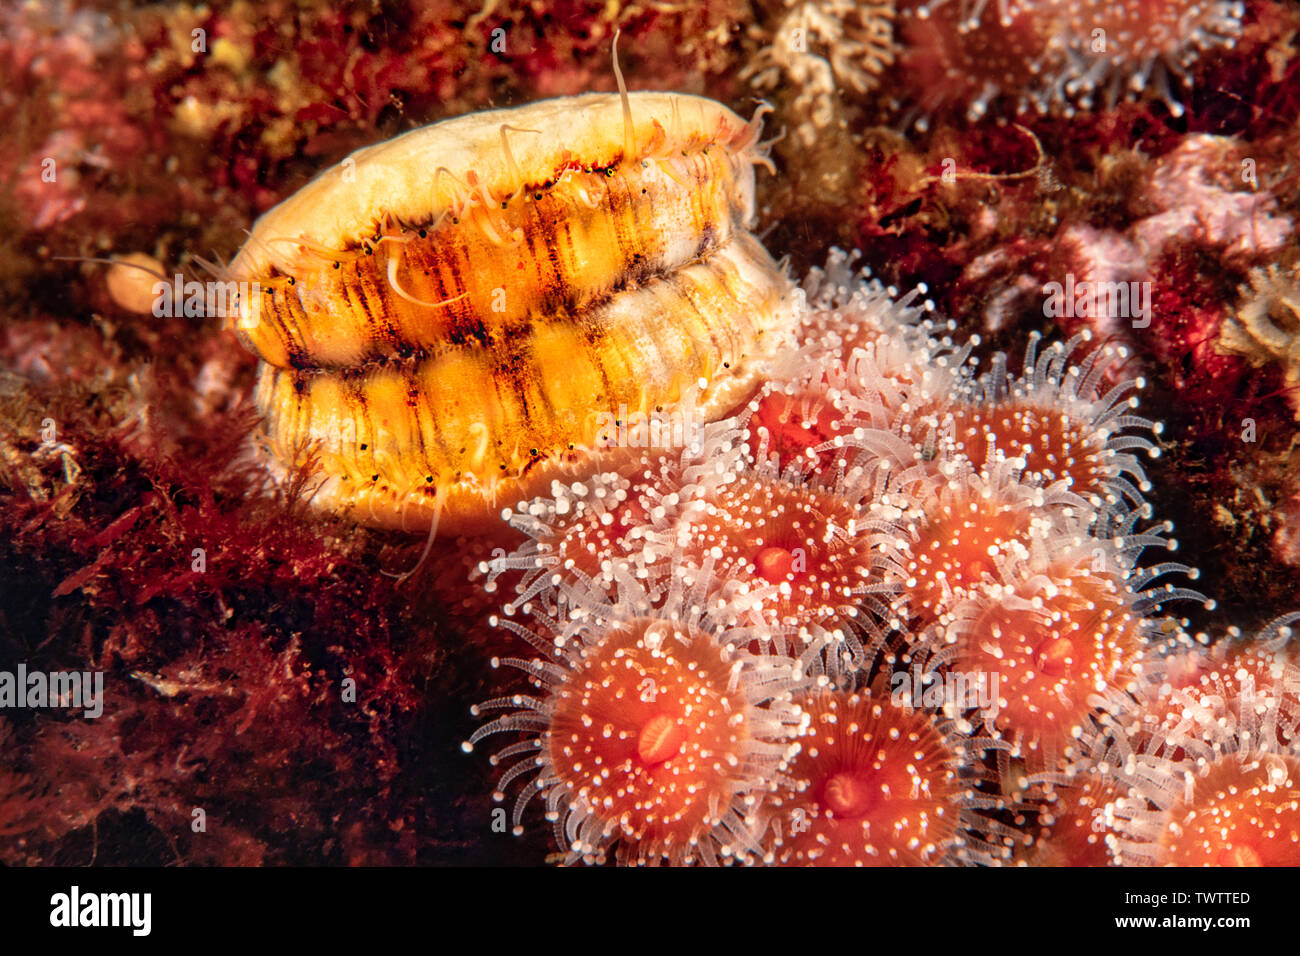 A swimming scallop, Chlamys hastata, and strawberry anemones, Corynactis californica, Campbell River, British Columbia, Canada. Stock Photo